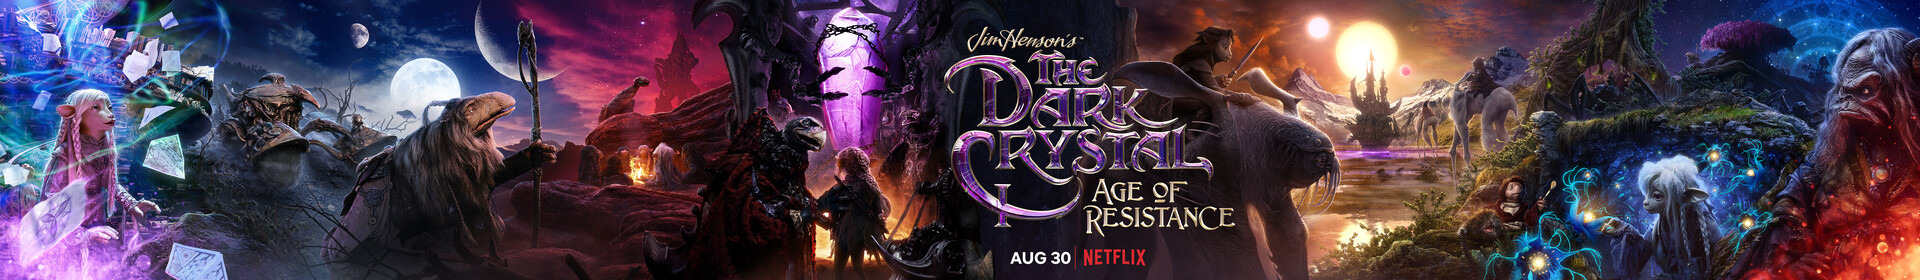 Extra Large TV Poster Image for The Dark Crystal: Age of Resistance (#4 of 5)